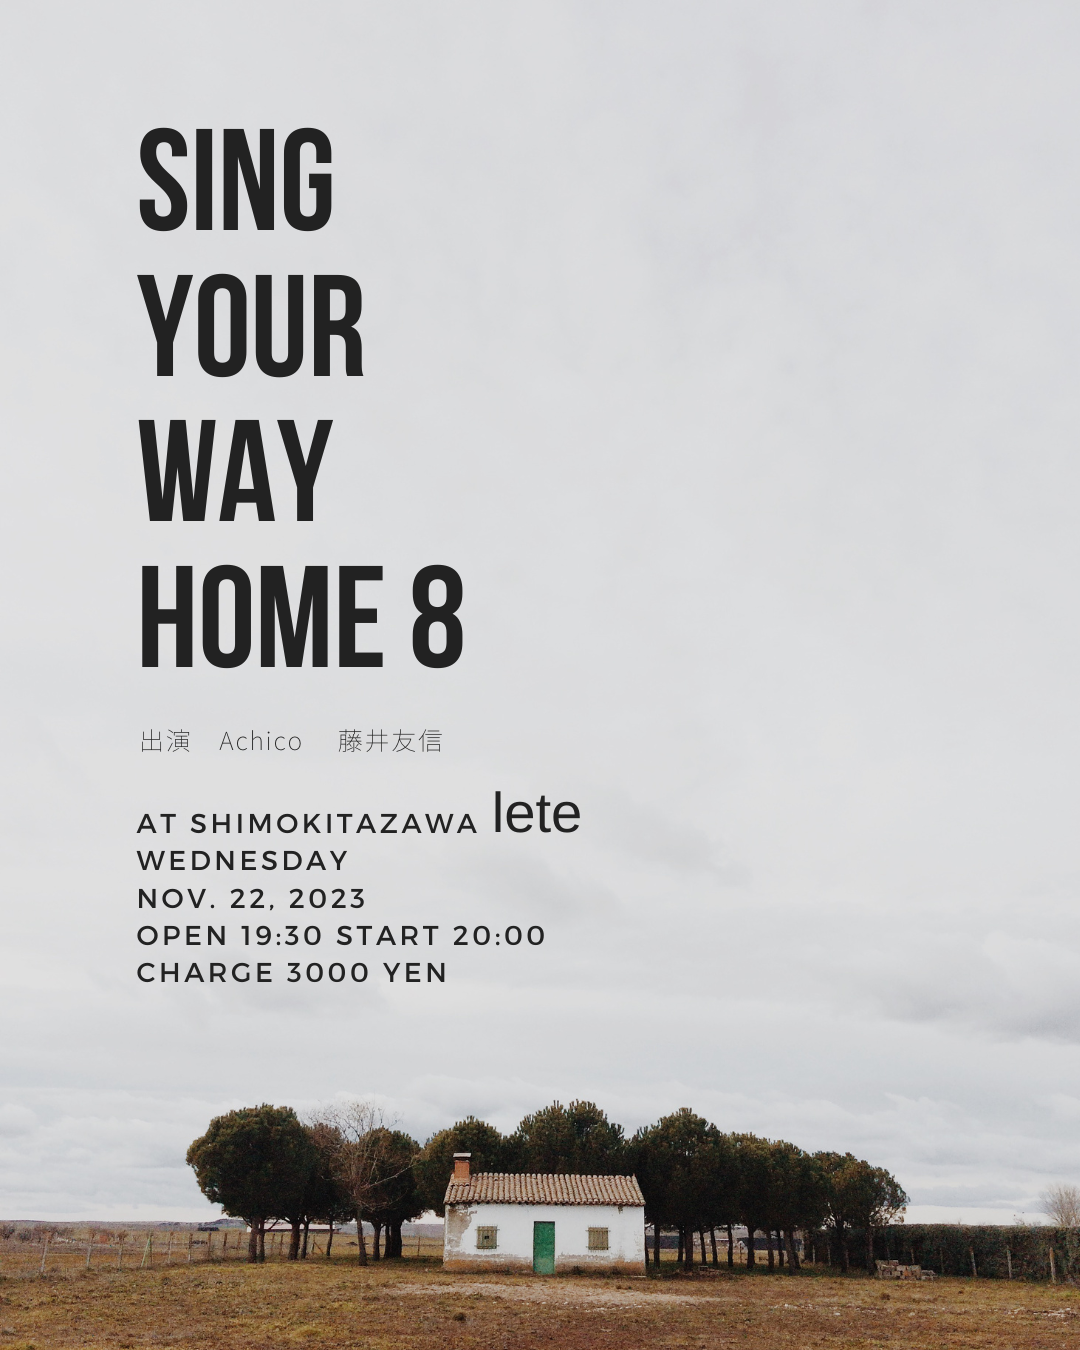 SING your way home 8 (3)